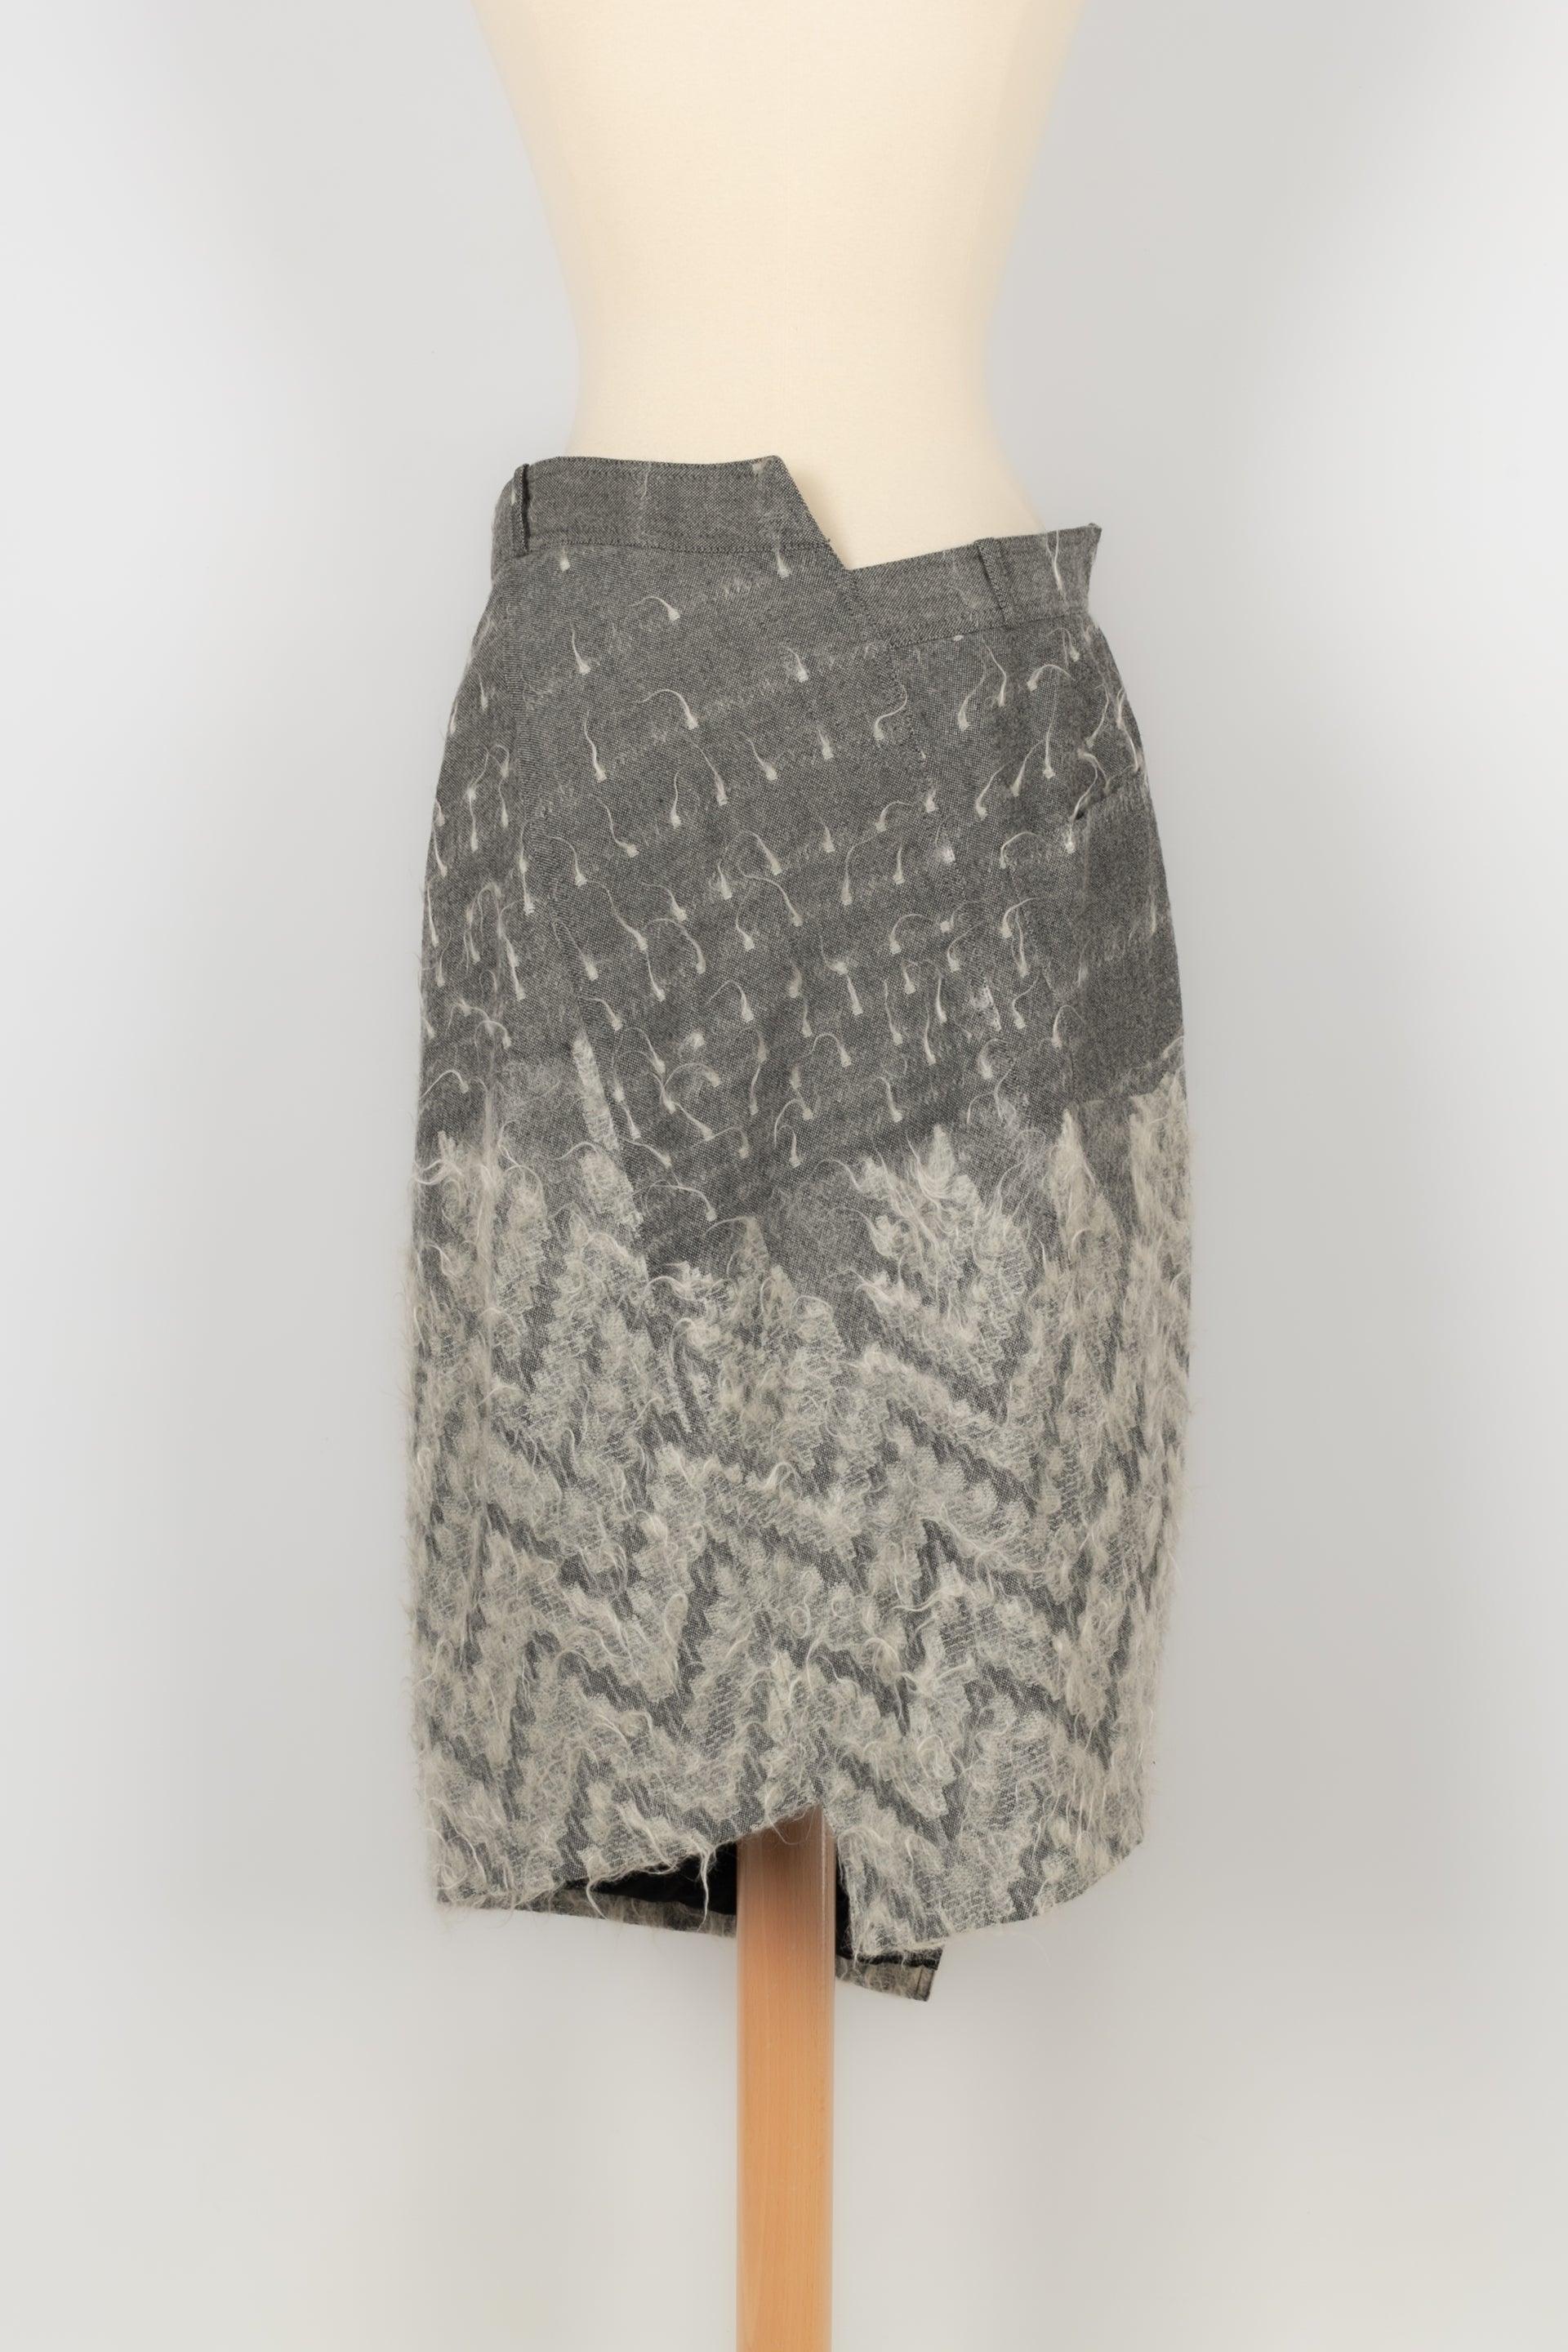 Christian Dior Mohair and Wool Asymmetrical Skirt, 2000s In Excellent Condition For Sale In SAINT-OUEN-SUR-SEINE, FR